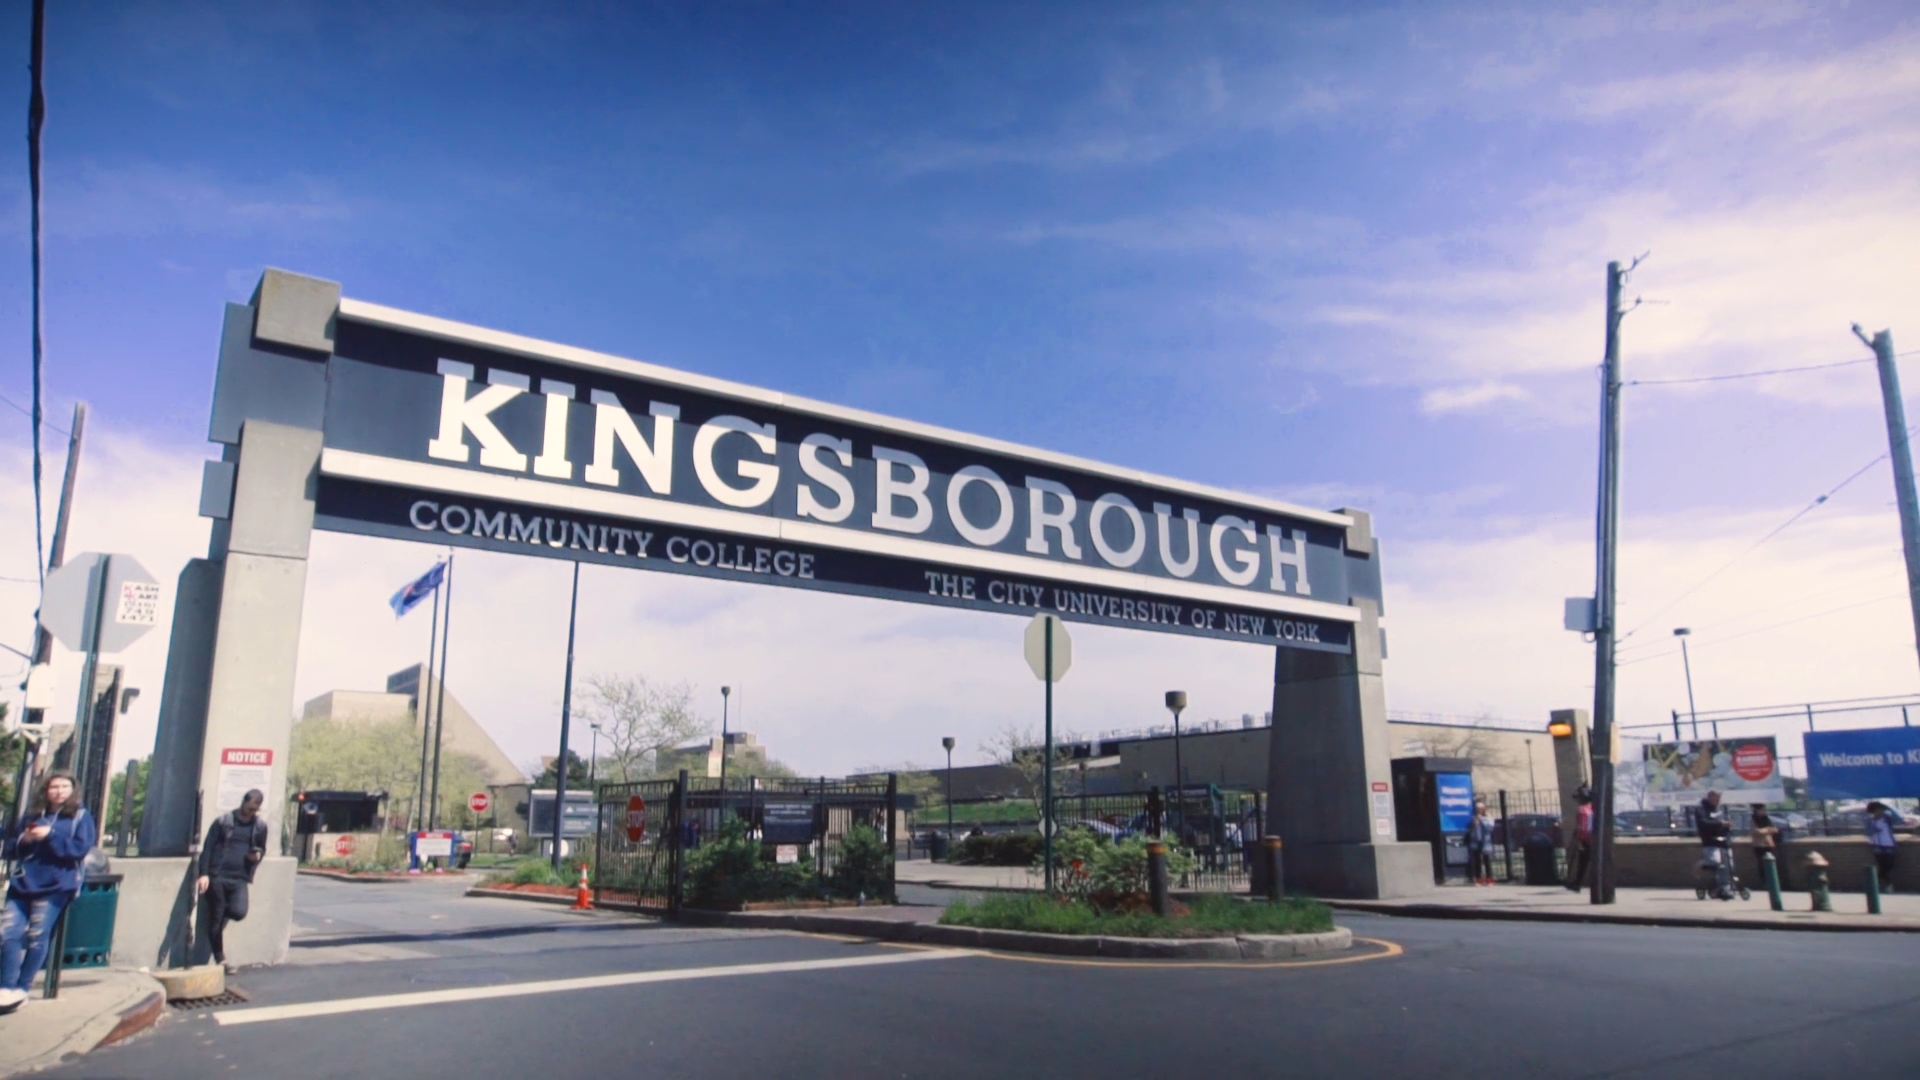 Kingsborough College to receive funding from Citizens Bank